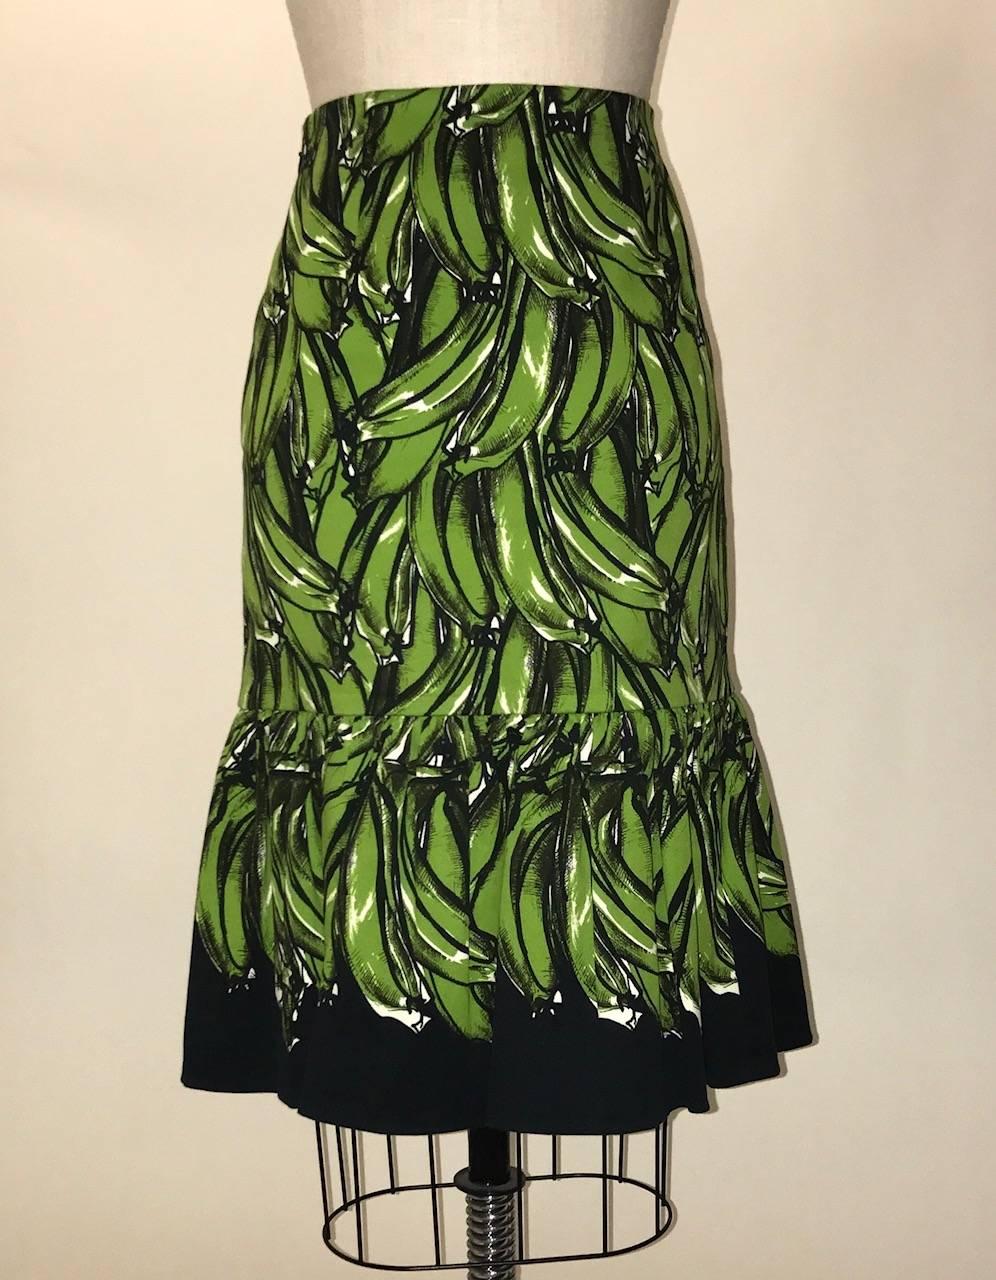 Prada green and black pencil skirt with banana print and a fun flared ruffle bottom. 

98% cotton, 2% other.
Fully lined in 74% cupro, 26% silk.

Made in Italy.

Size IT 40, approximate US 4. See measurements. Light stretch, measurements taken